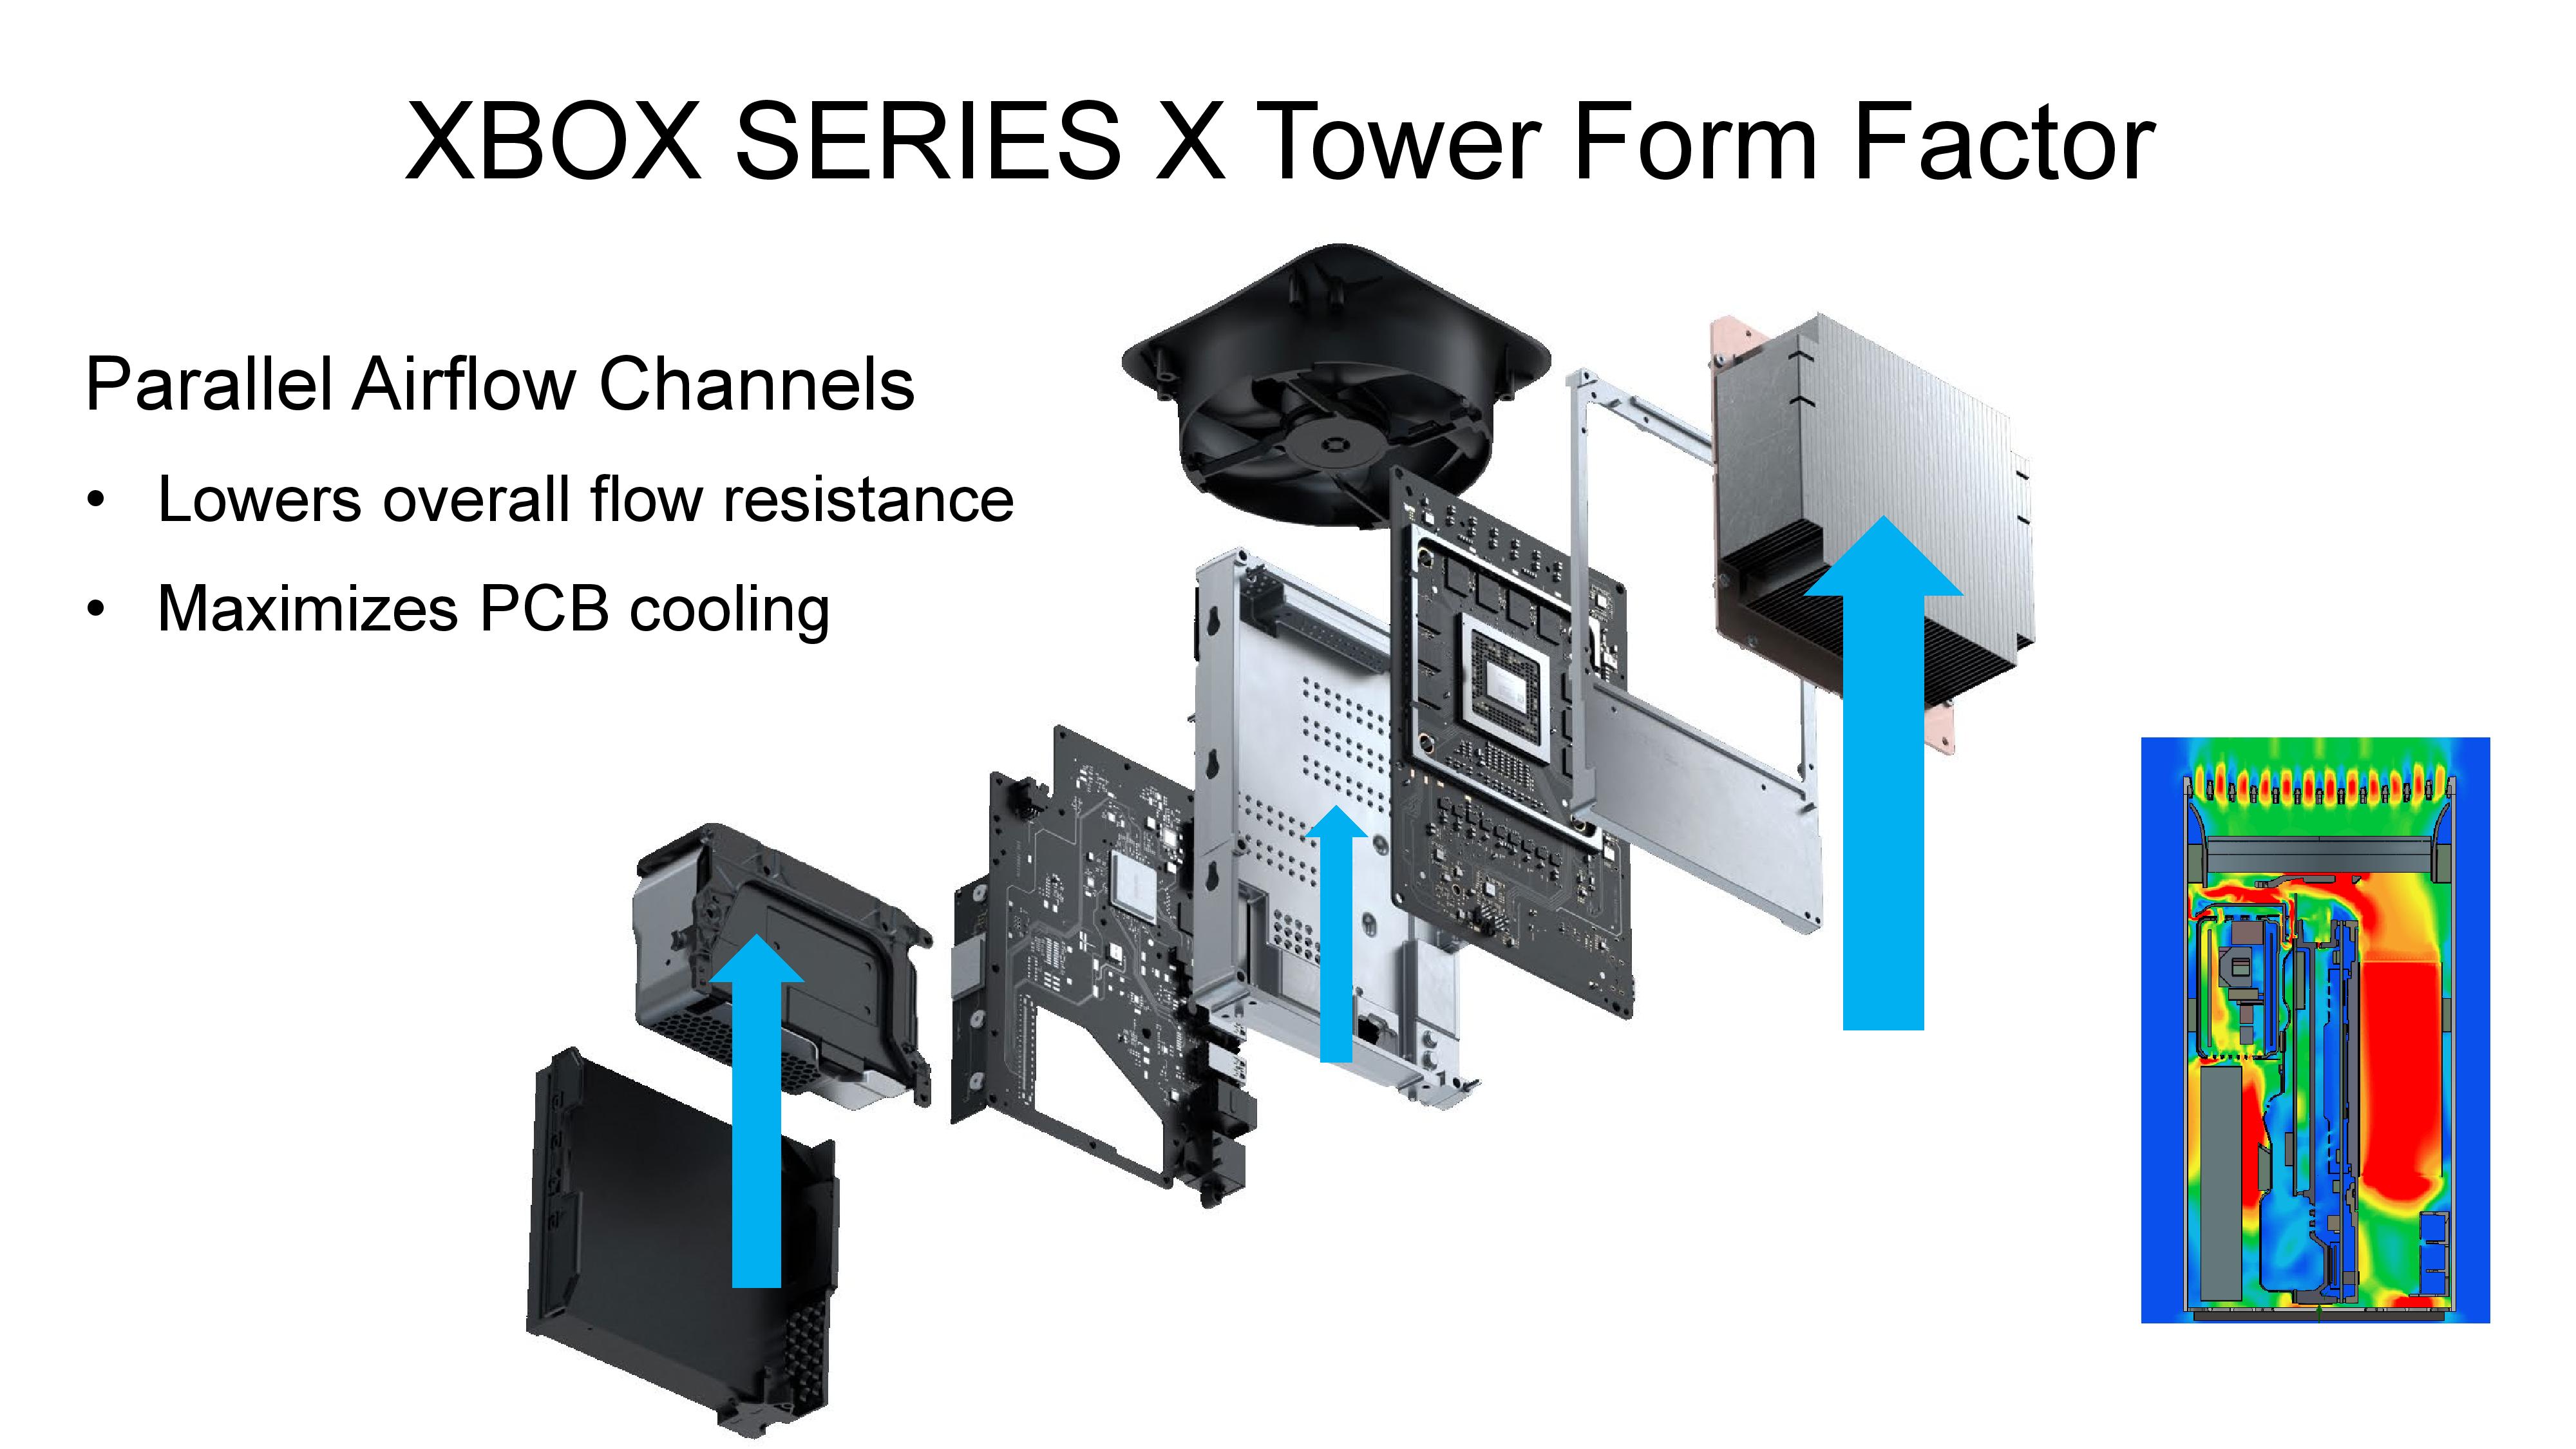 Xbox Series X SoC: Power, Thermal, and Yield Tradeoffs